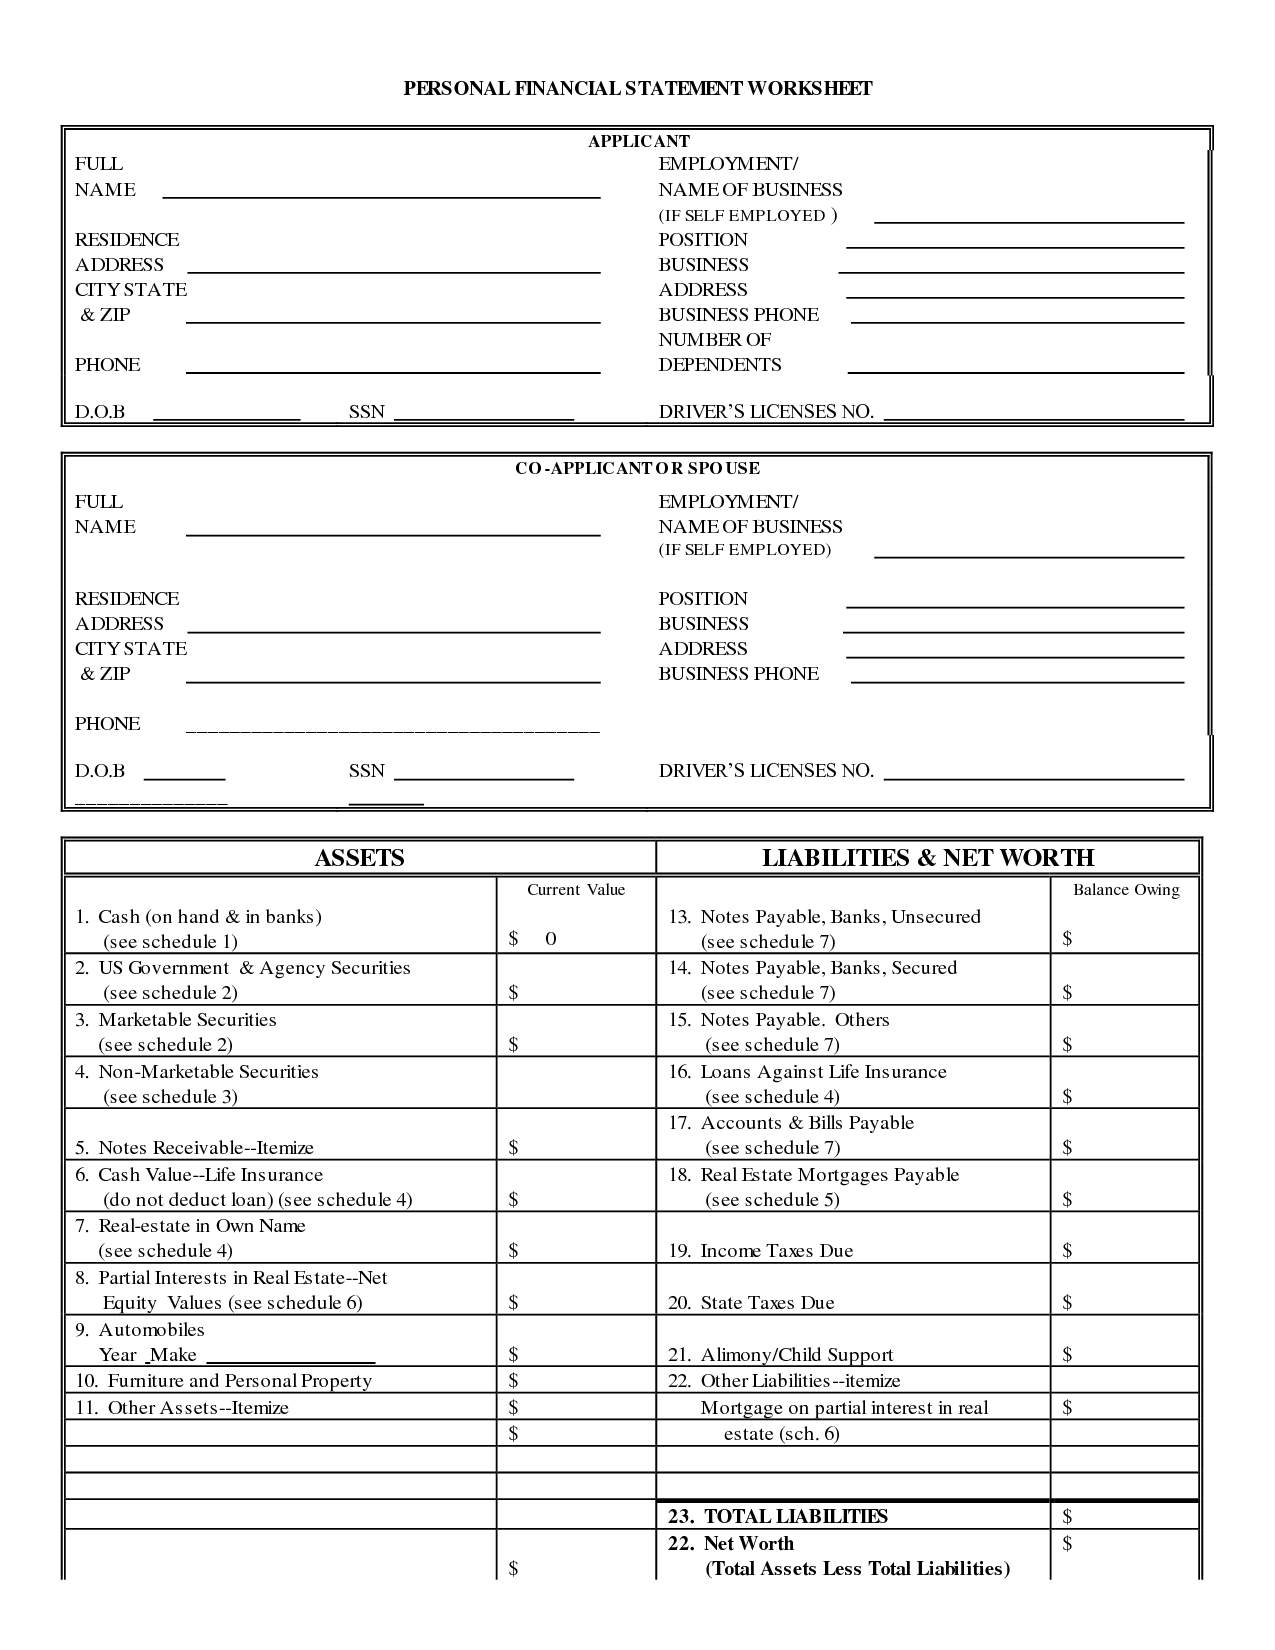 Business Financial Statement Form Printable Image